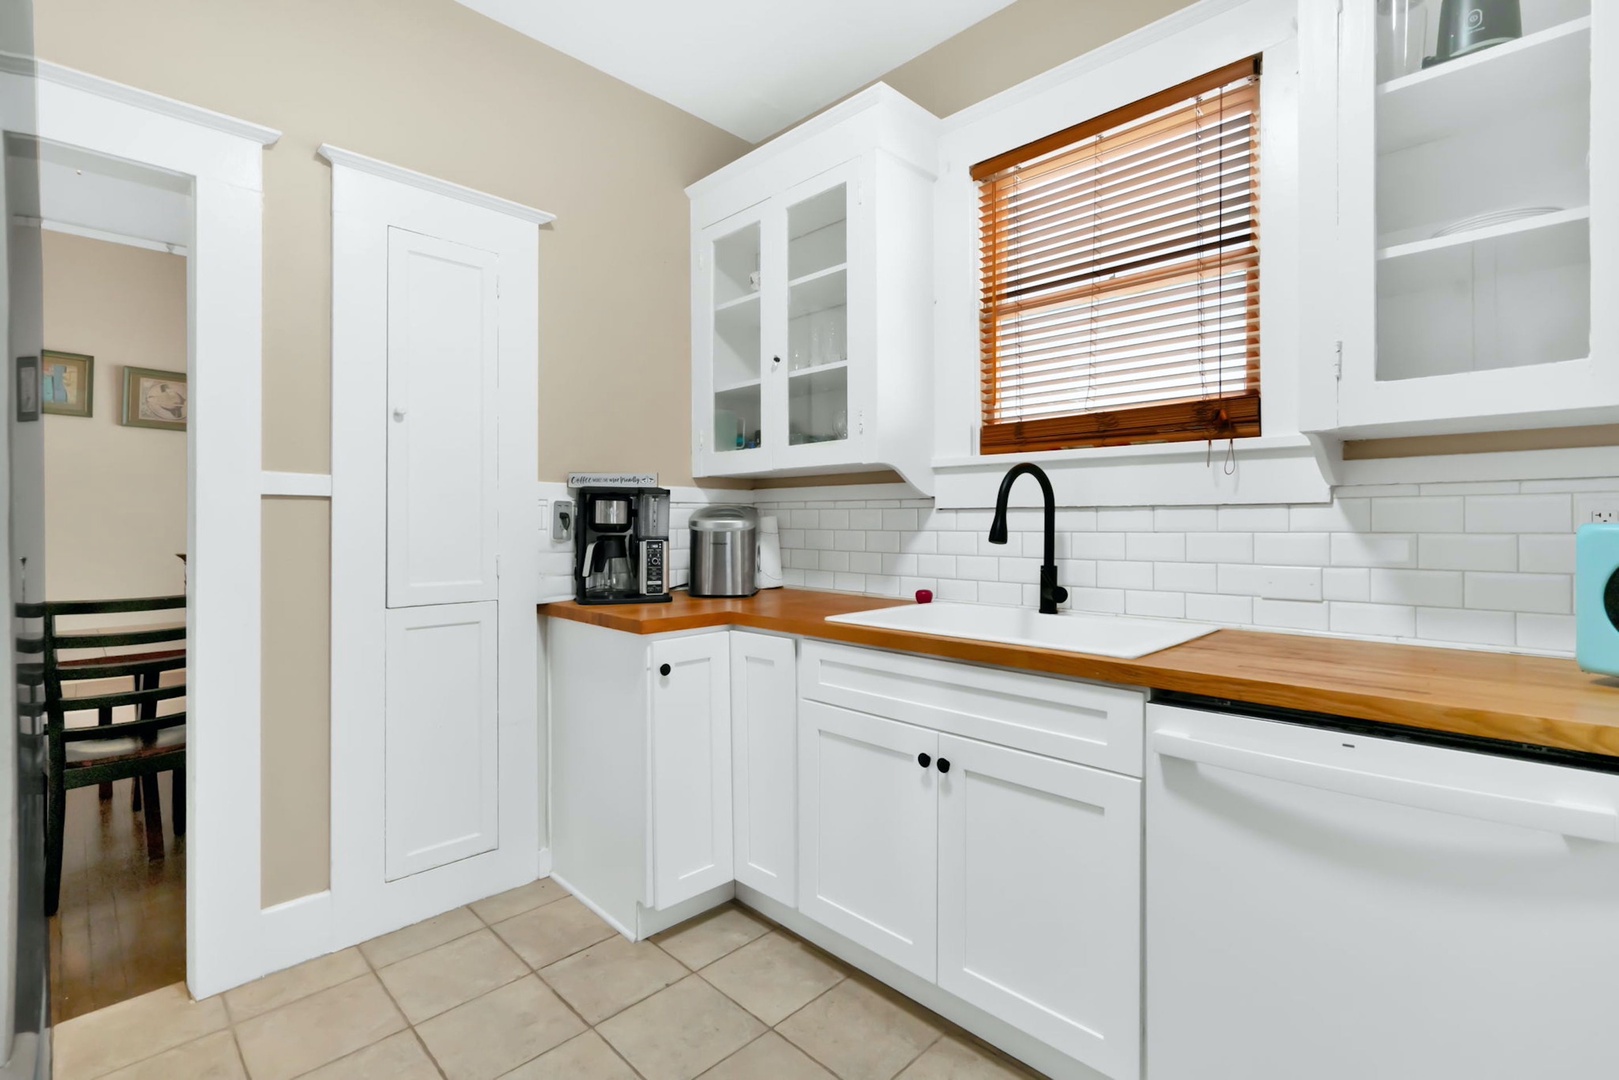 The welcoming kitchen provides ample space & all the comforts of home